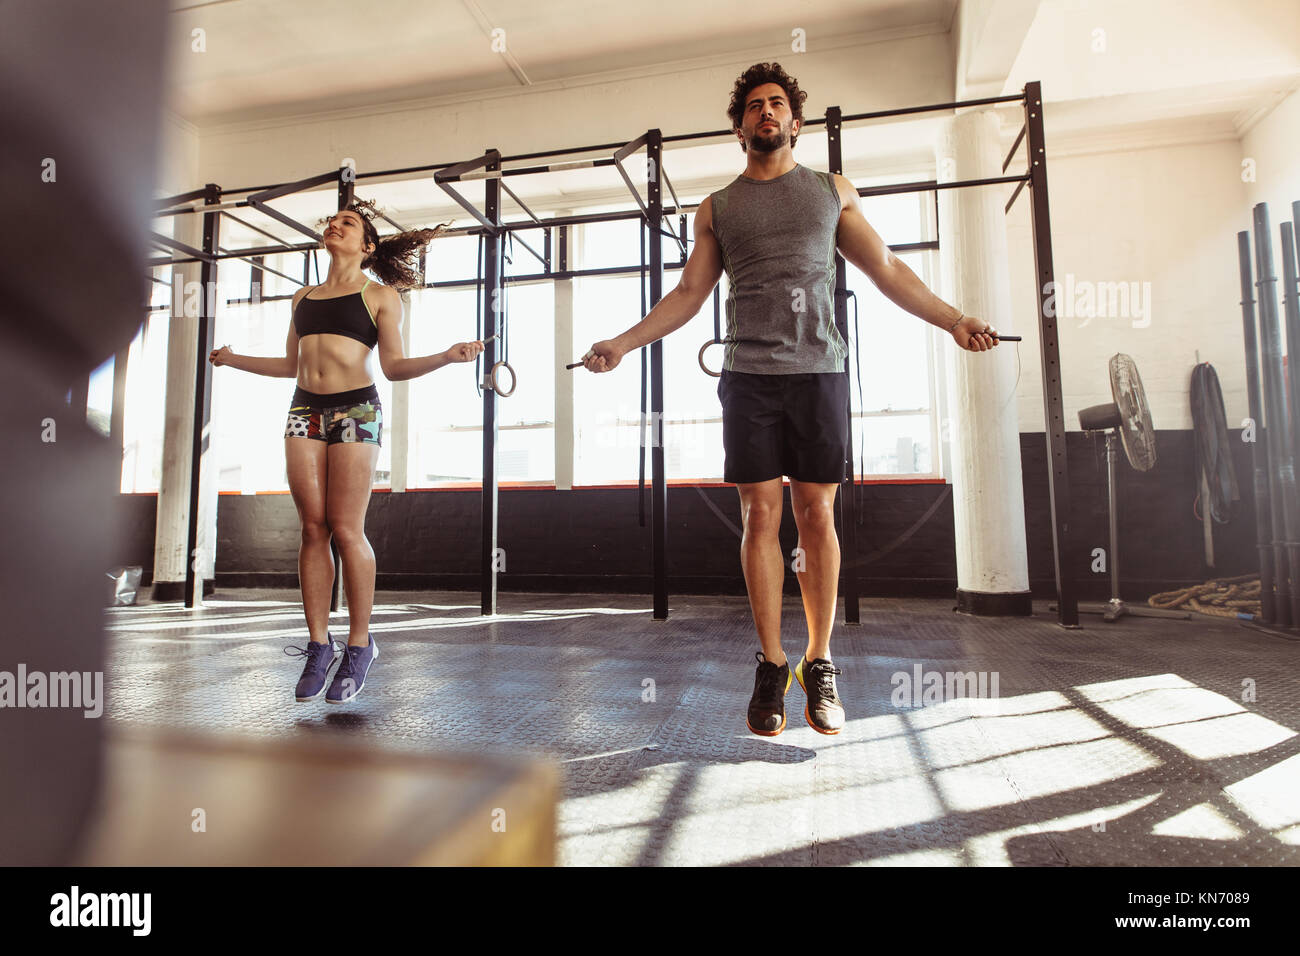 Muscular man and woman exercising using skipping rope in gym. Couple workout with jumping ropes in cross training gym. Stock Photo